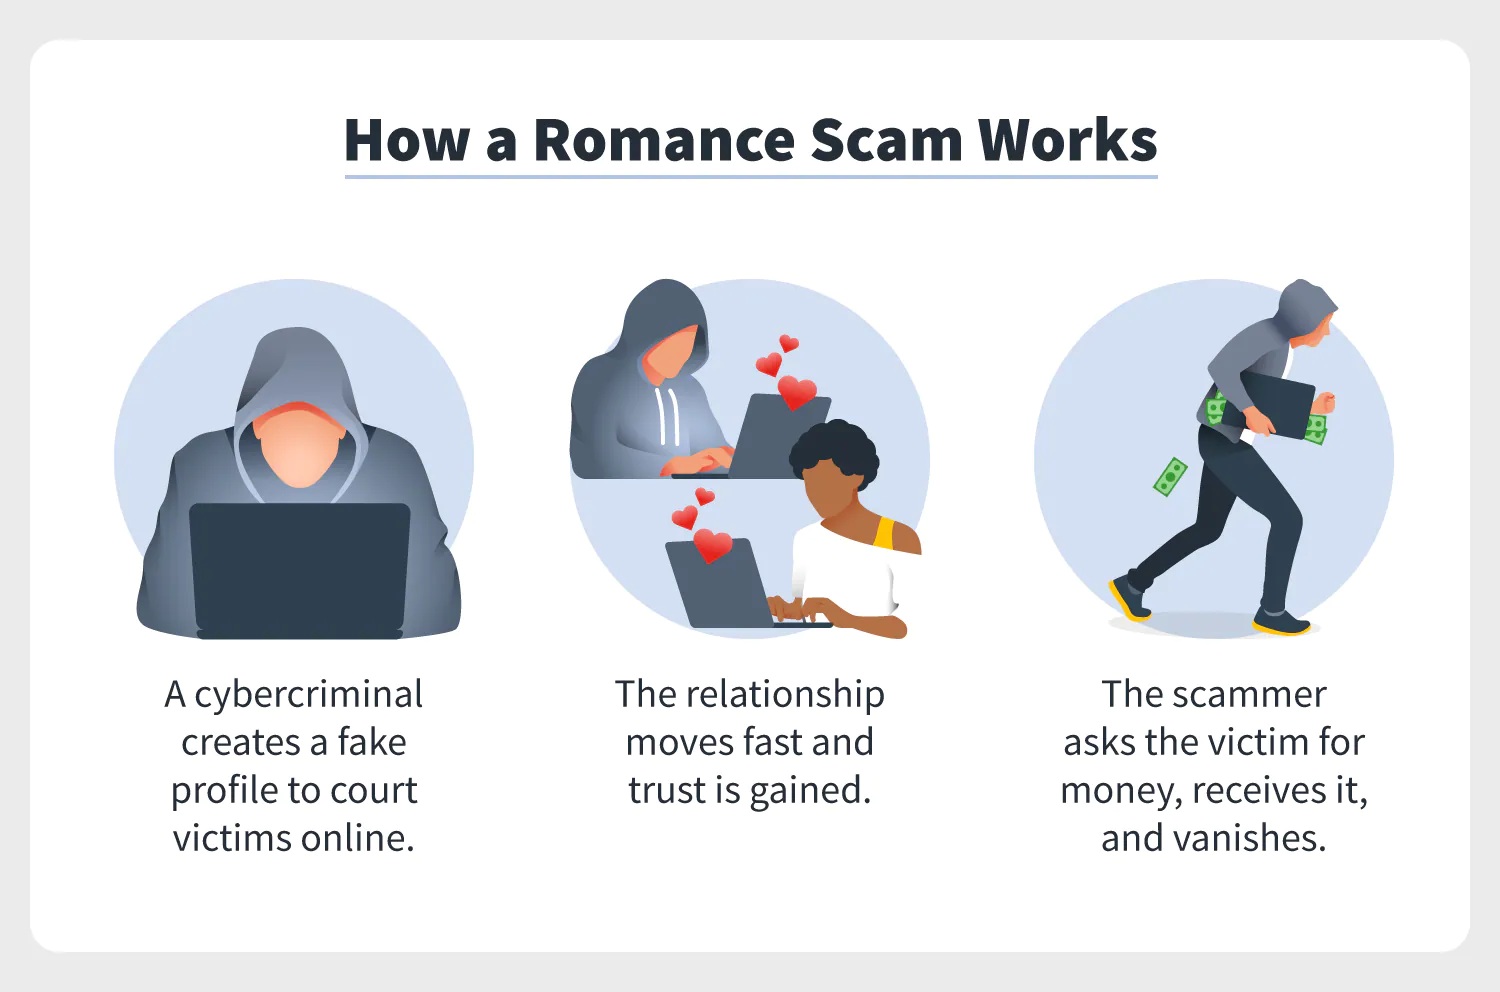 Online dating and romance scams often begin as a typical online relationshi...